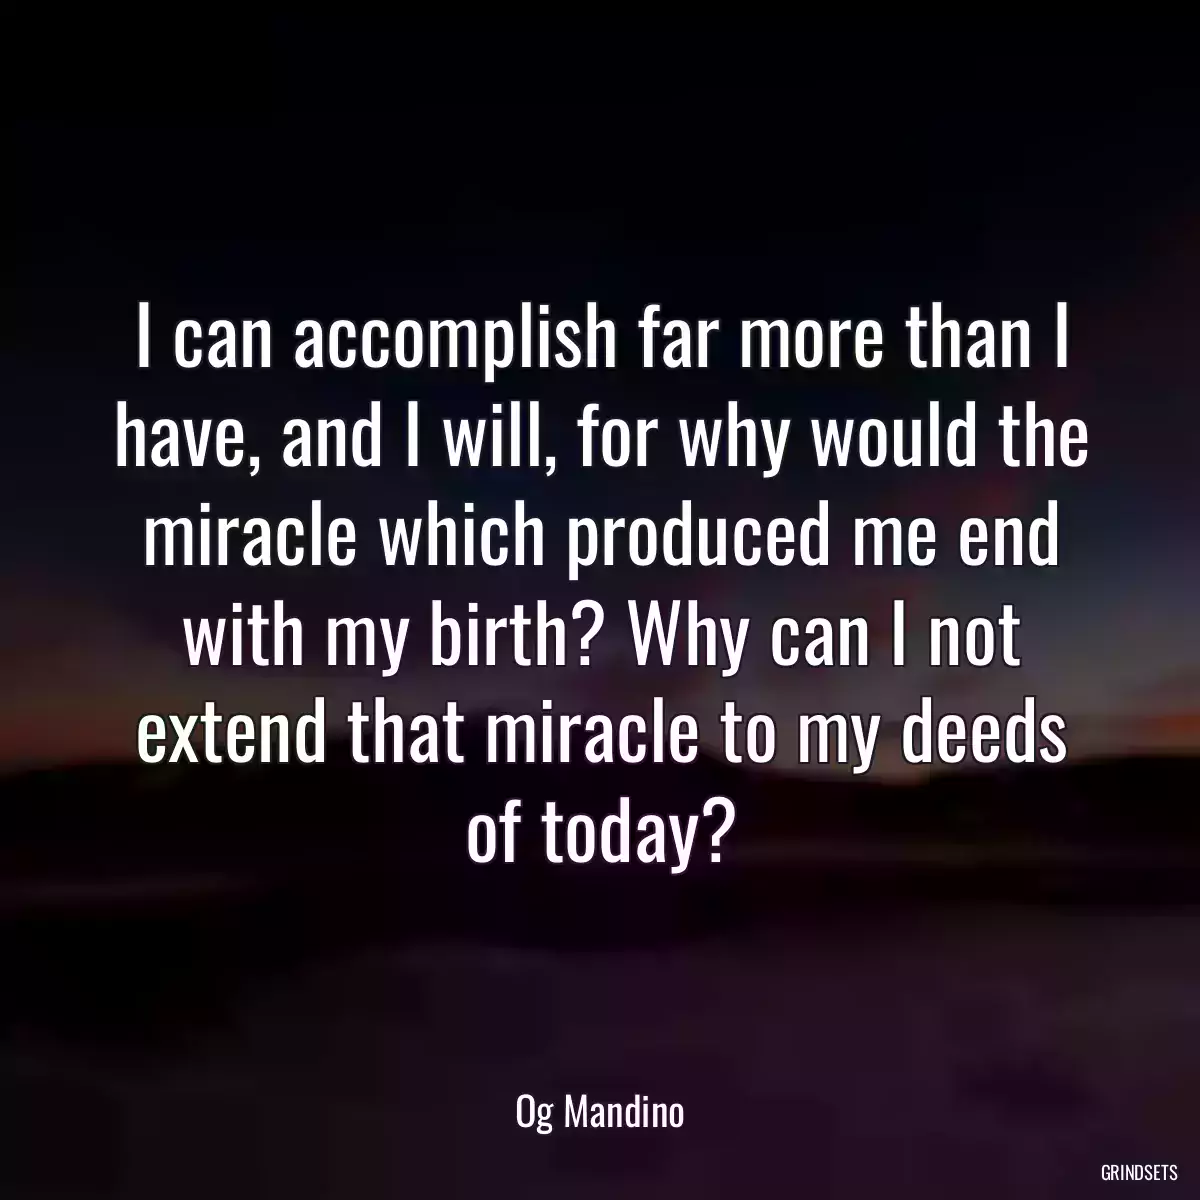 I can accomplish far more than I have, and I will, for why would the miracle which produced me end with my birth? Why can I not extend that miracle to my deeds of today?